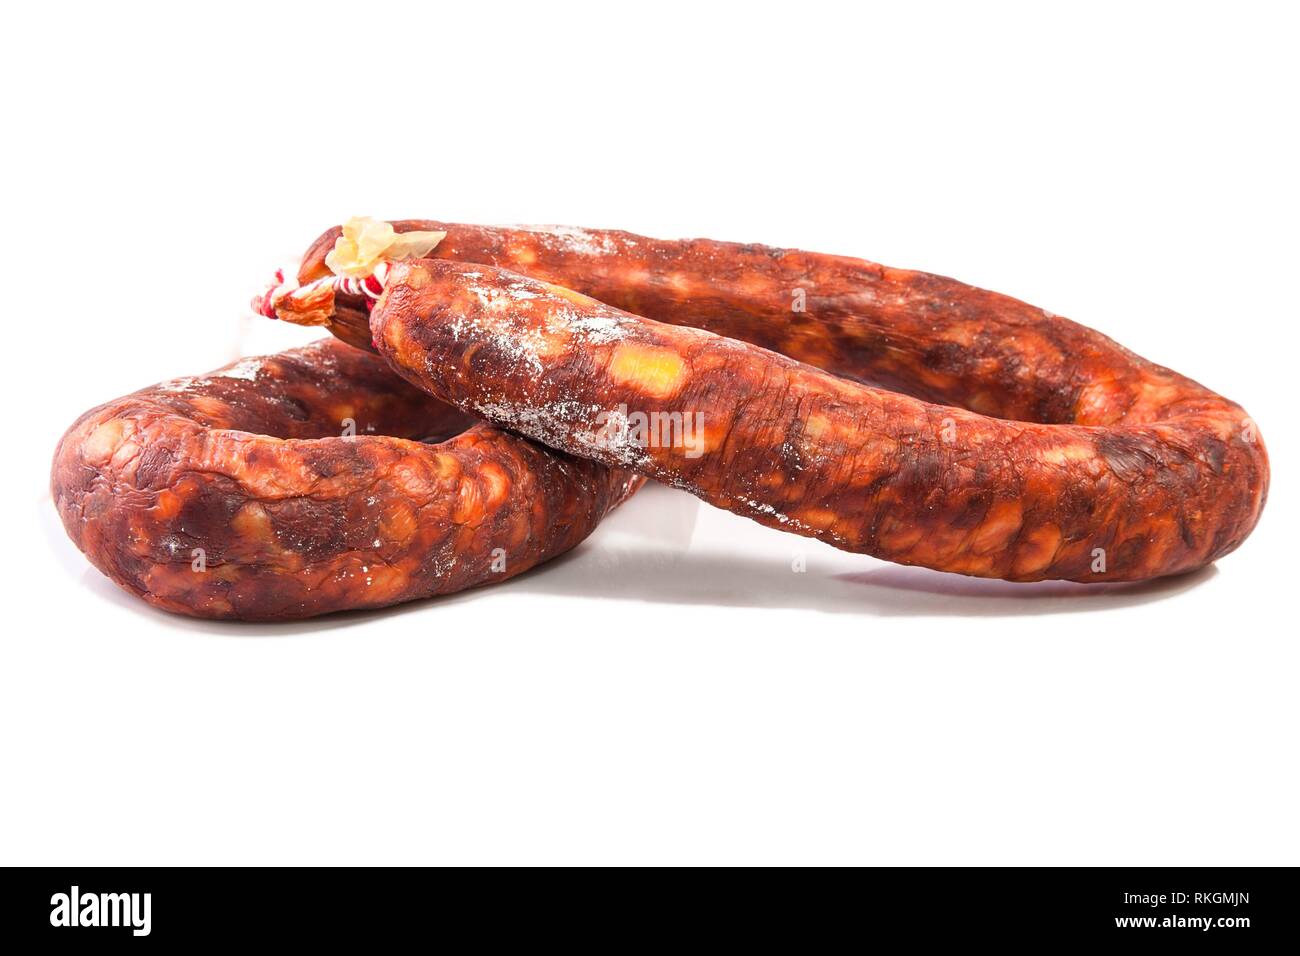 Iberian red spanish chorizos with their distinctive smokiness and deep red color. Isolated over white background. Stock Photo